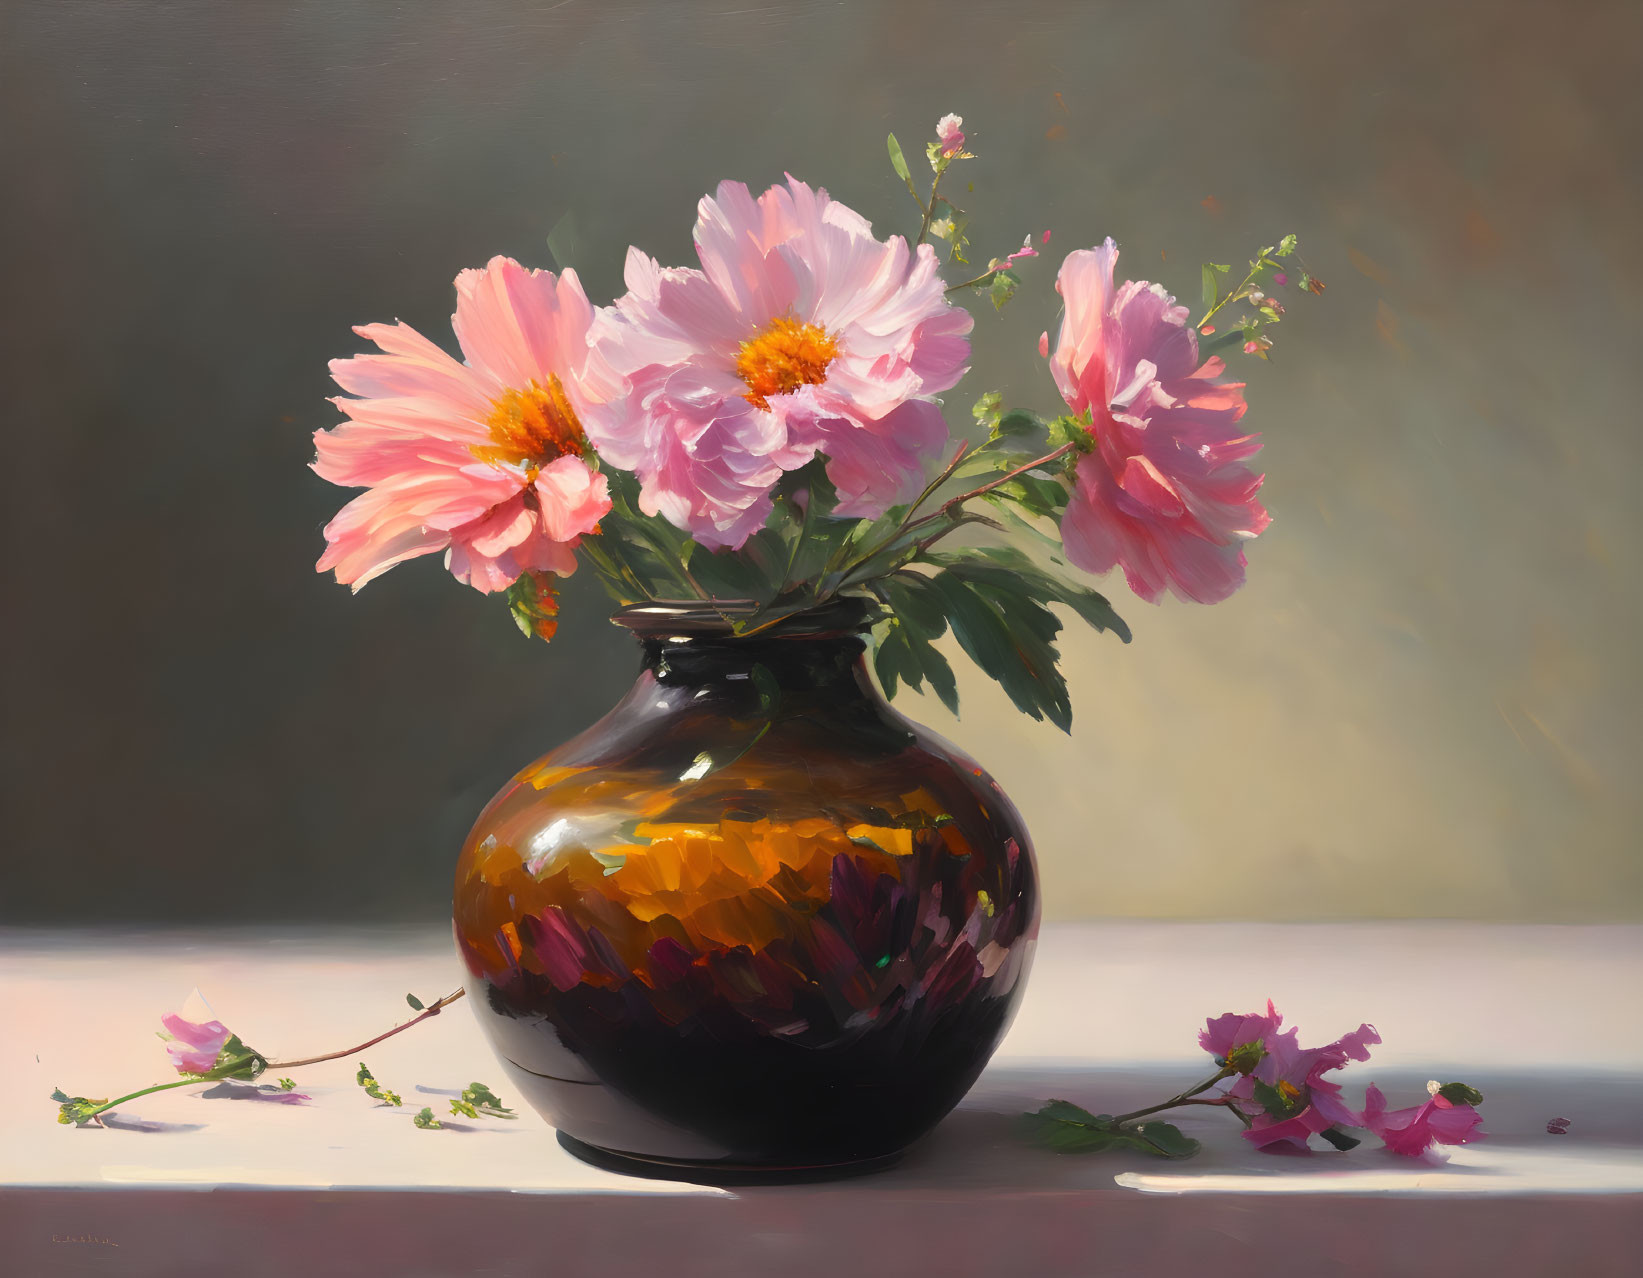 Pink peonies in amber vase on table surface with scattered petals